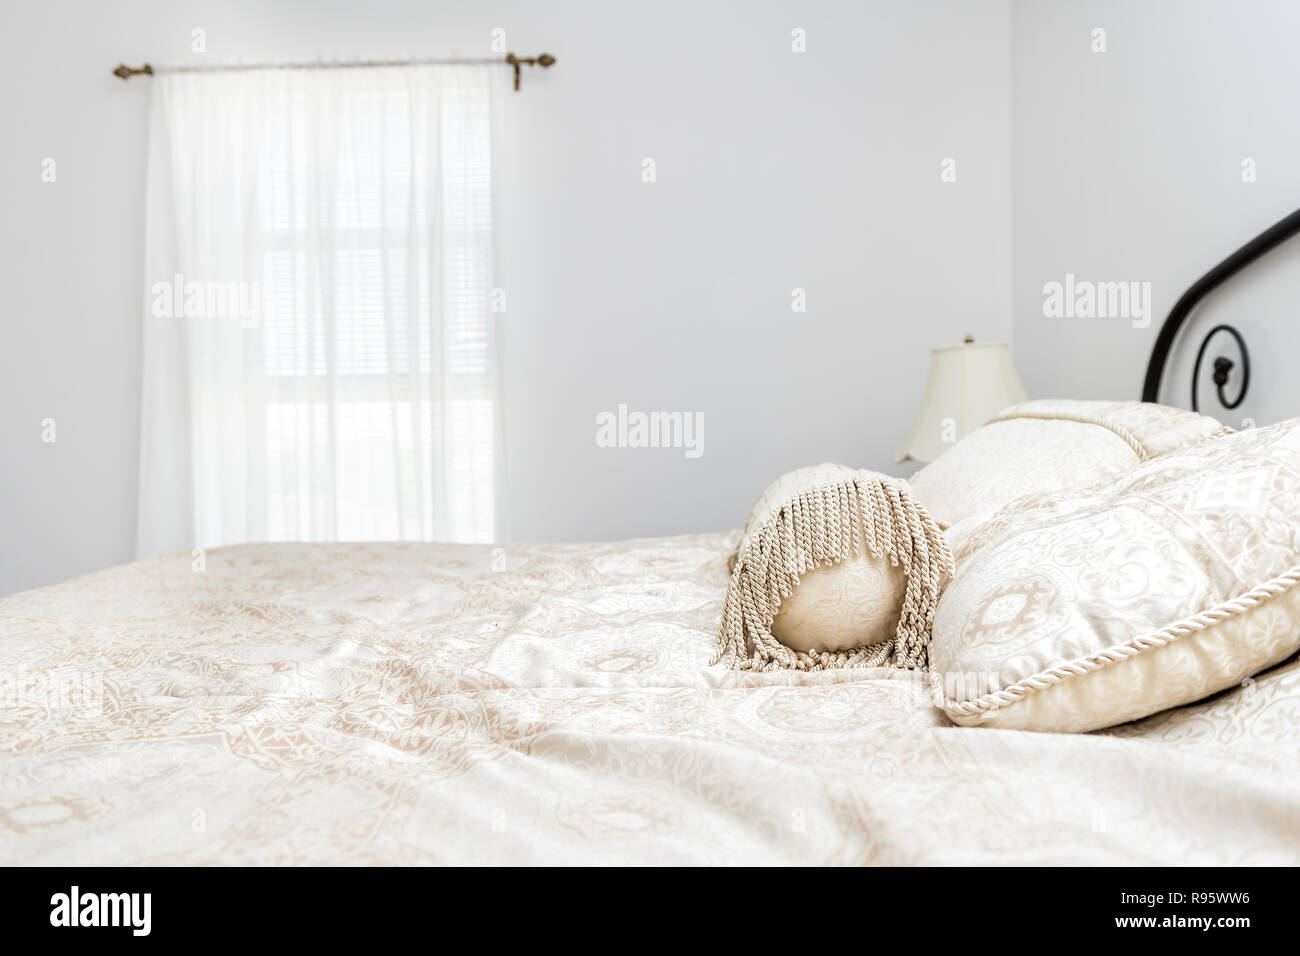 Closeup Of New Bed Comforter With Decorative Pillows In Bedroom In Staging  Model Home Apartment Or House Stock Photo - Download Image Now - iStock